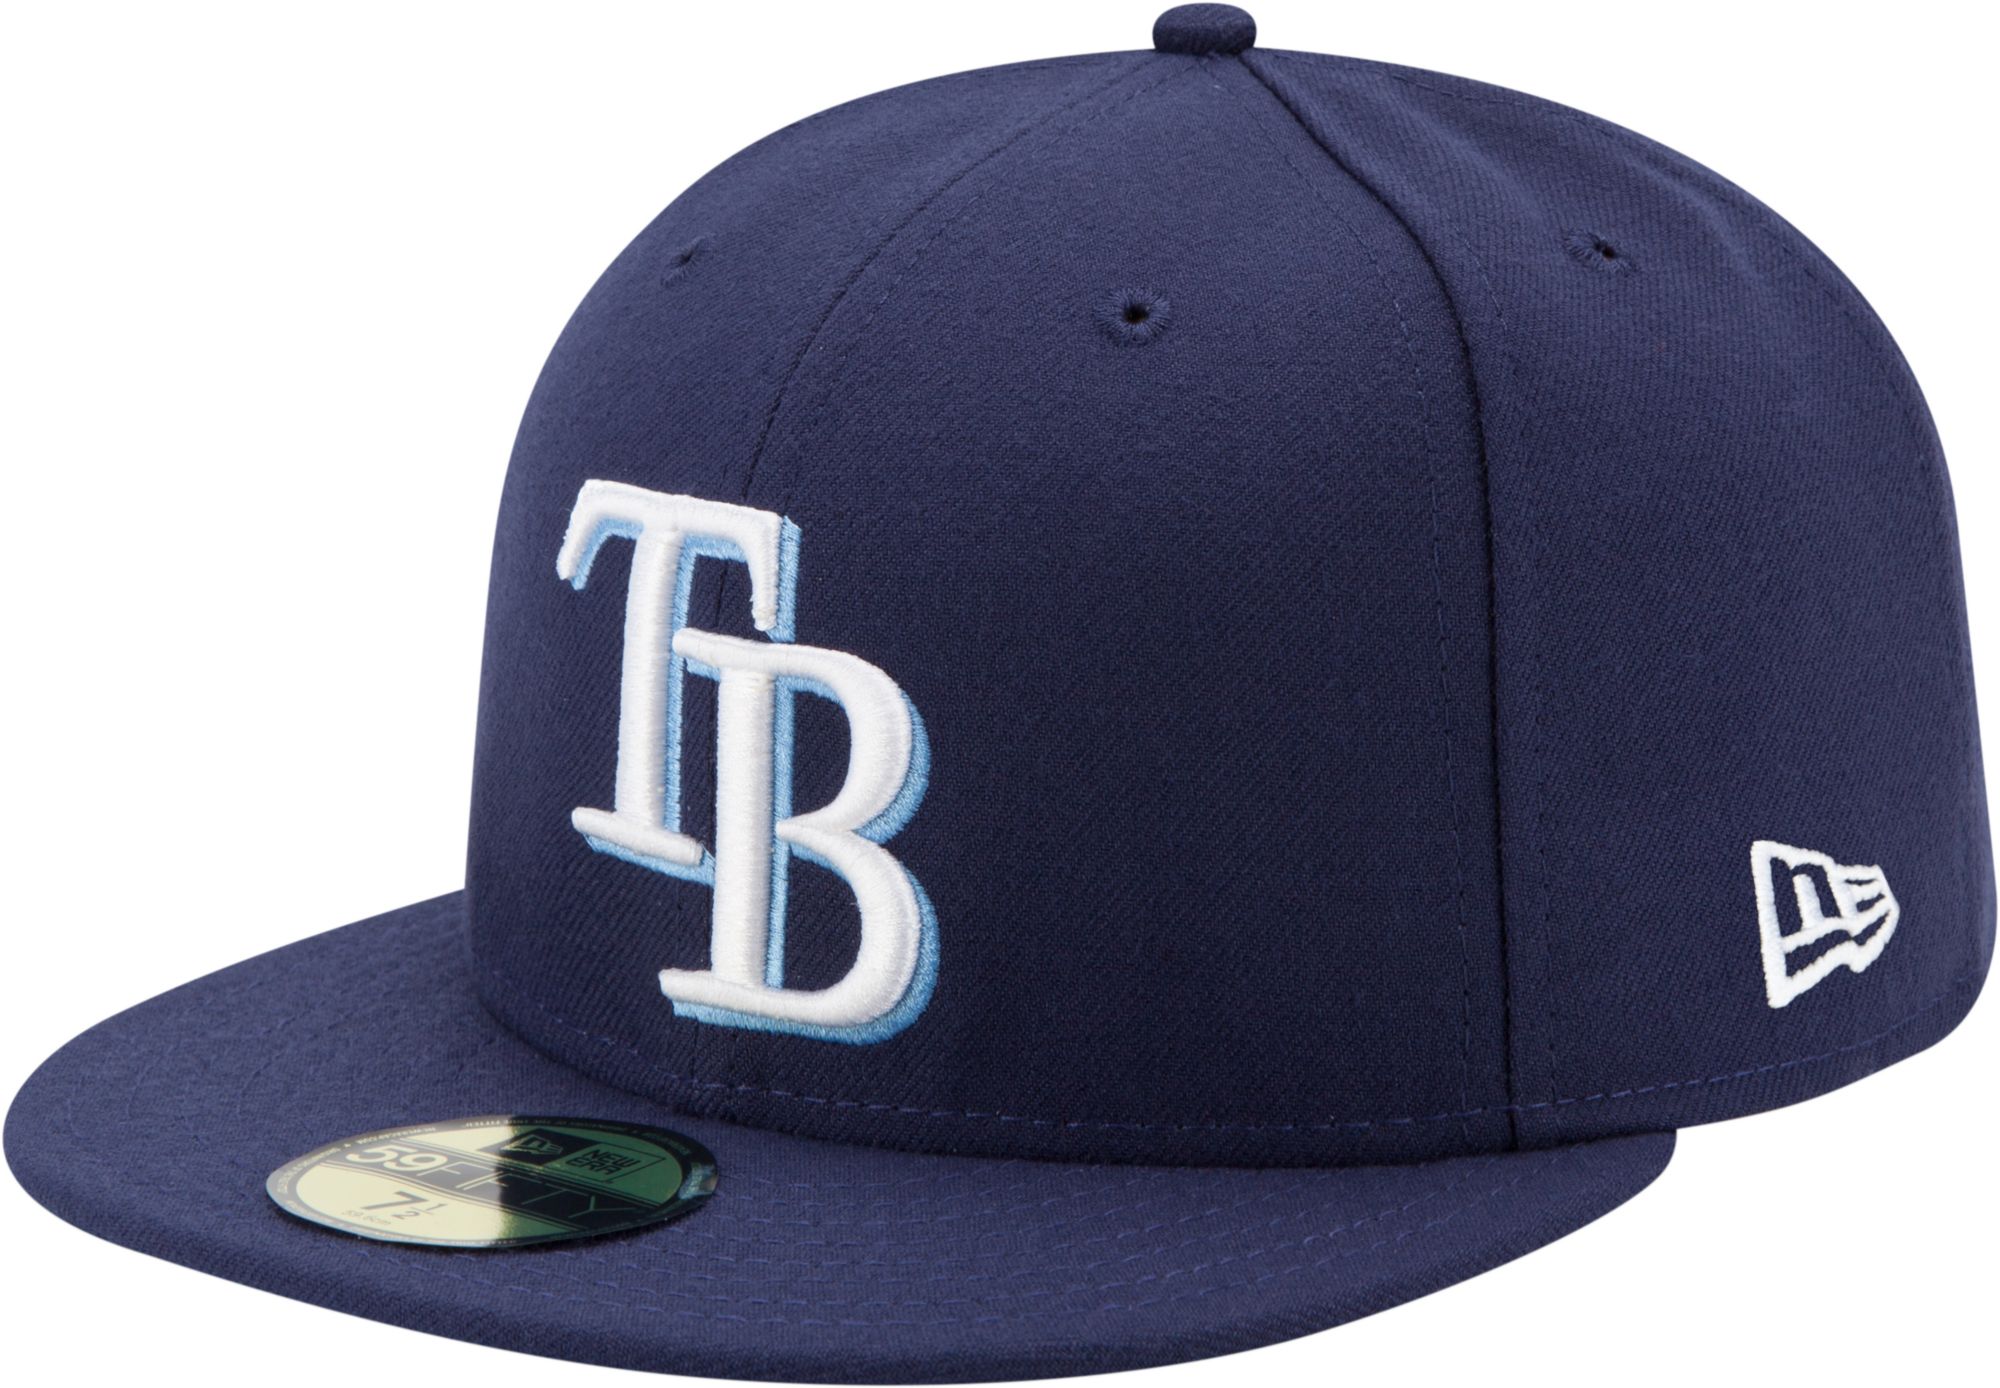 Tampa Bay Rays Upside Down 59FIFTY Fitted Navy Hat